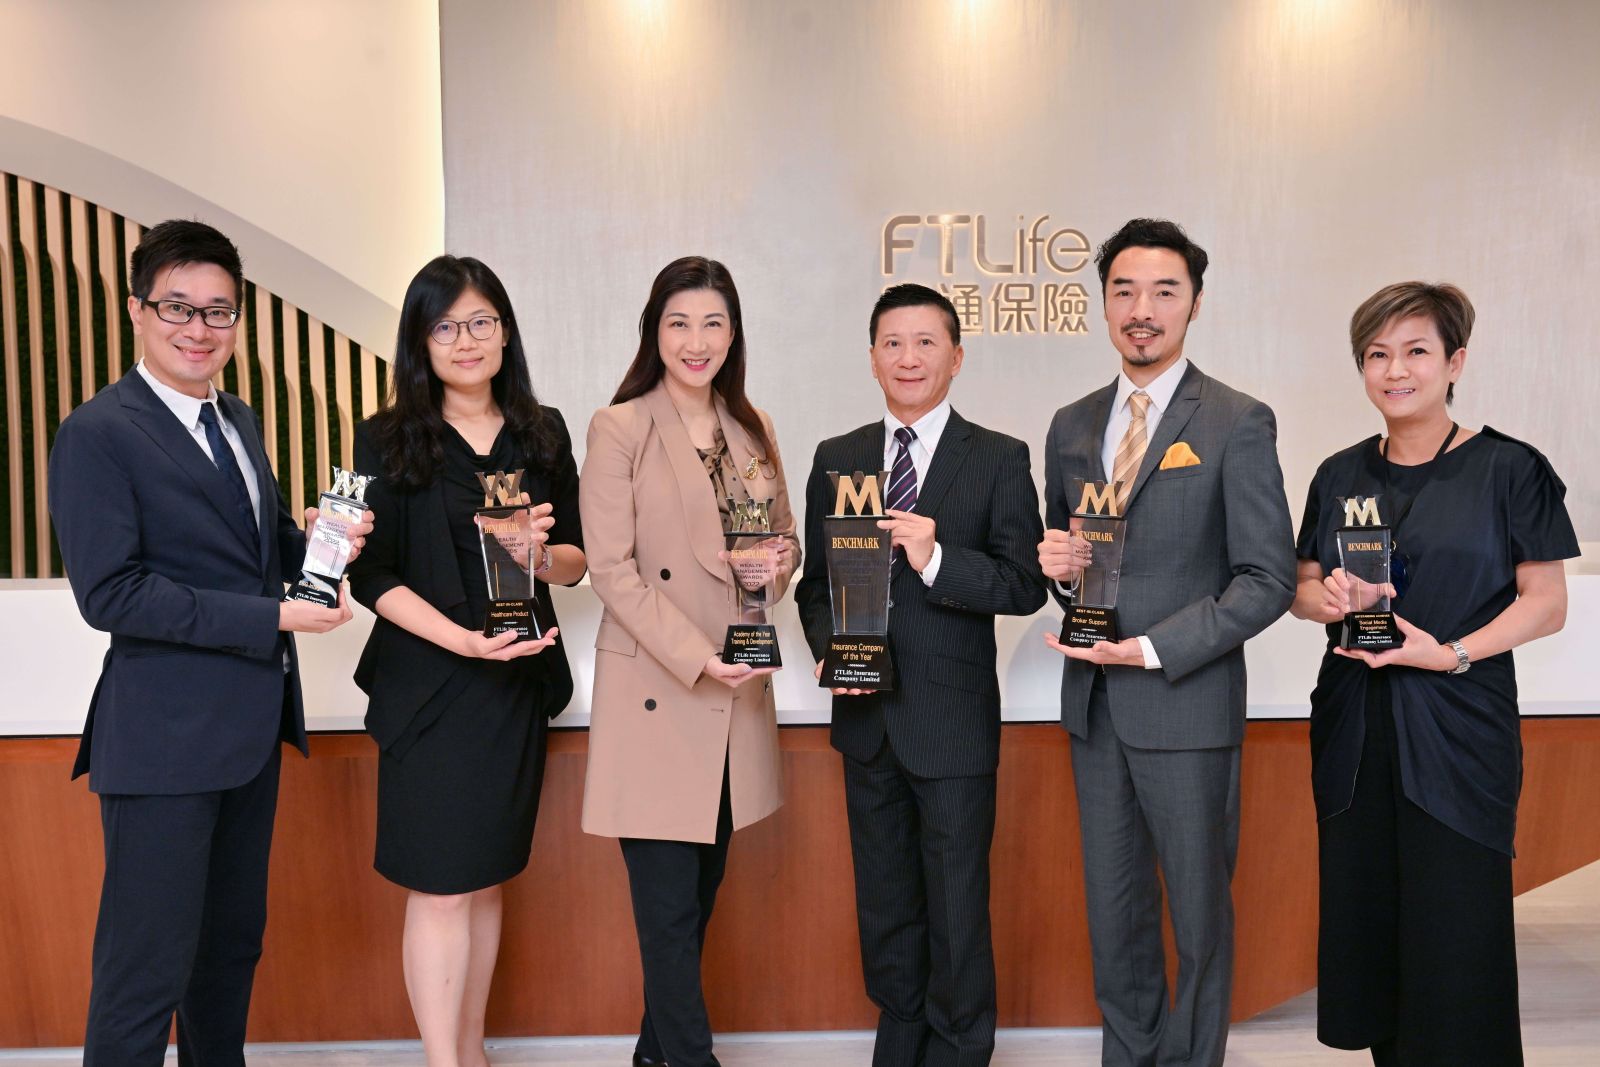 FTLife won six awards and named “Insurance Company of the Year 2022“ becoming the most awarded insurer at the Benchmark Wealth Management Awards 2022